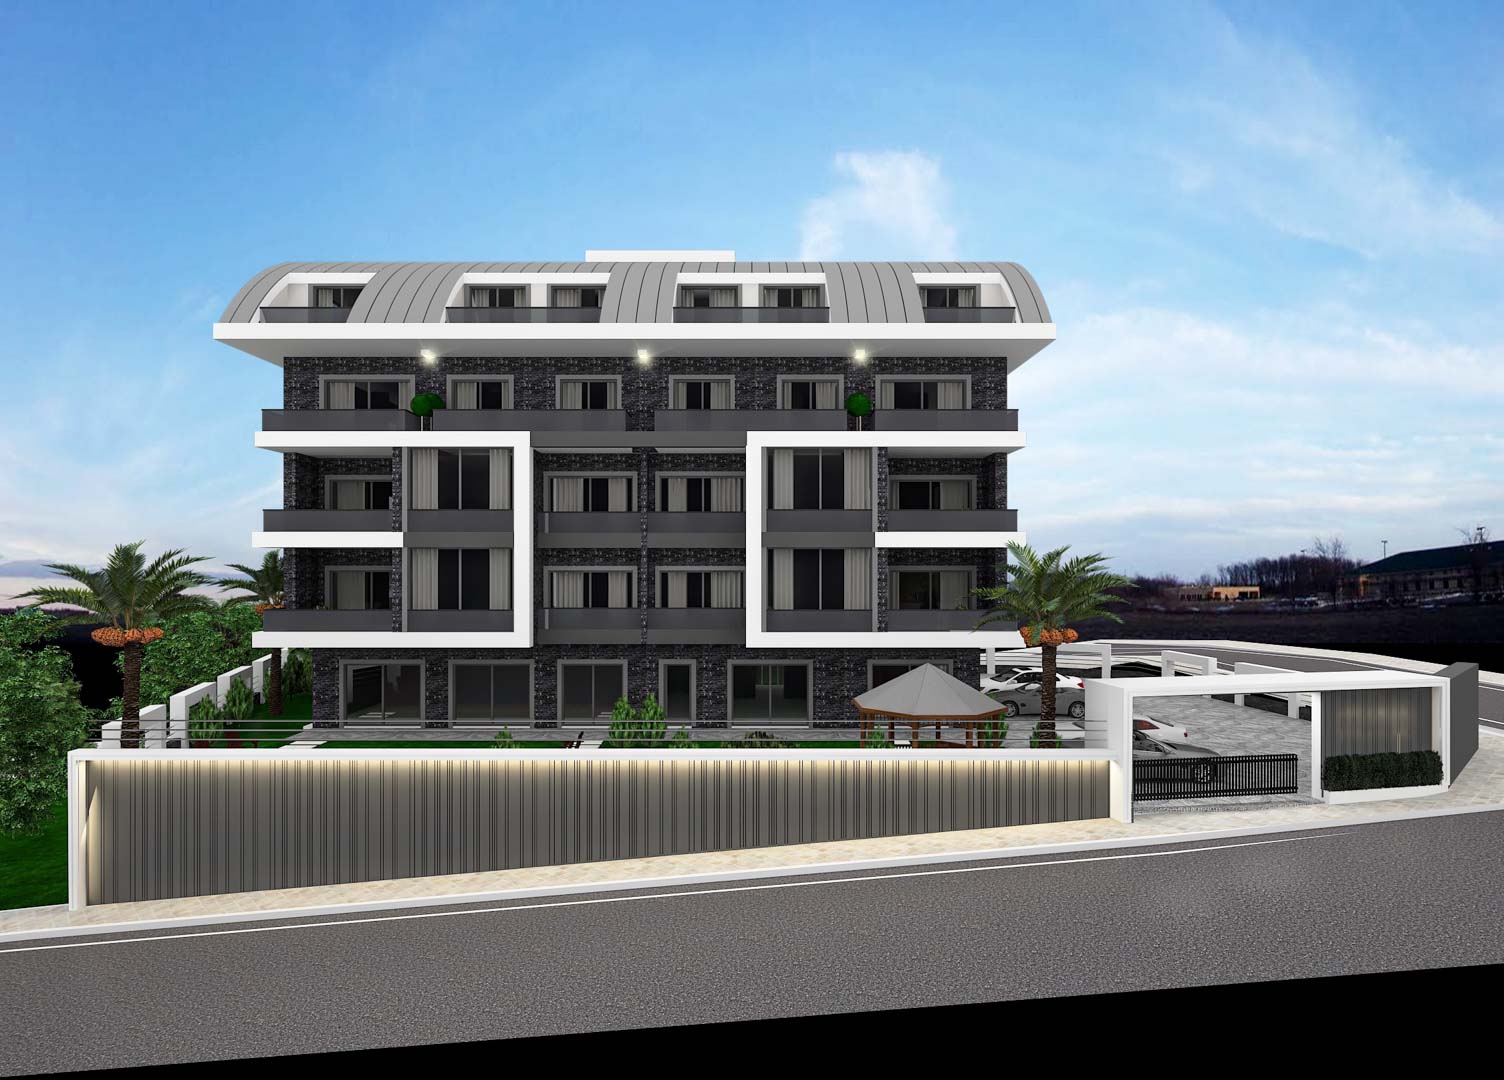 id1123-spacious-apartment-overlooking-the-mountains-in-hasbakhce-district (19)